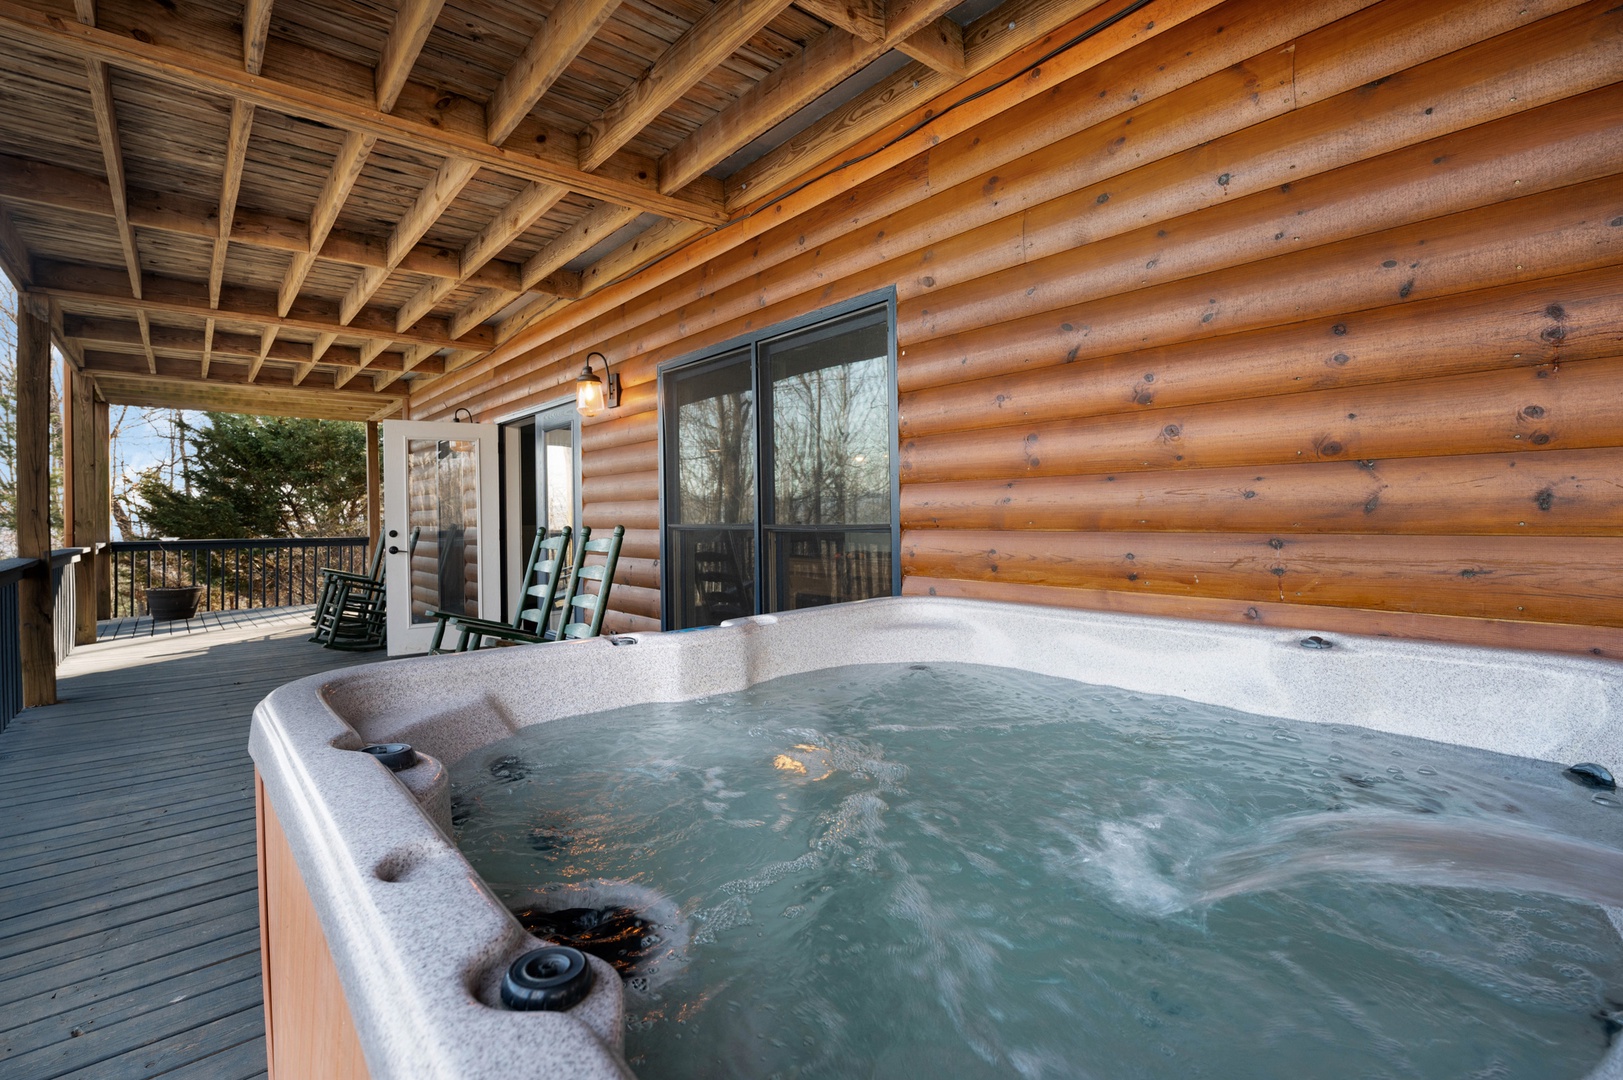 Above It All - Forget Your Worries while Soaking in the Hot Tub